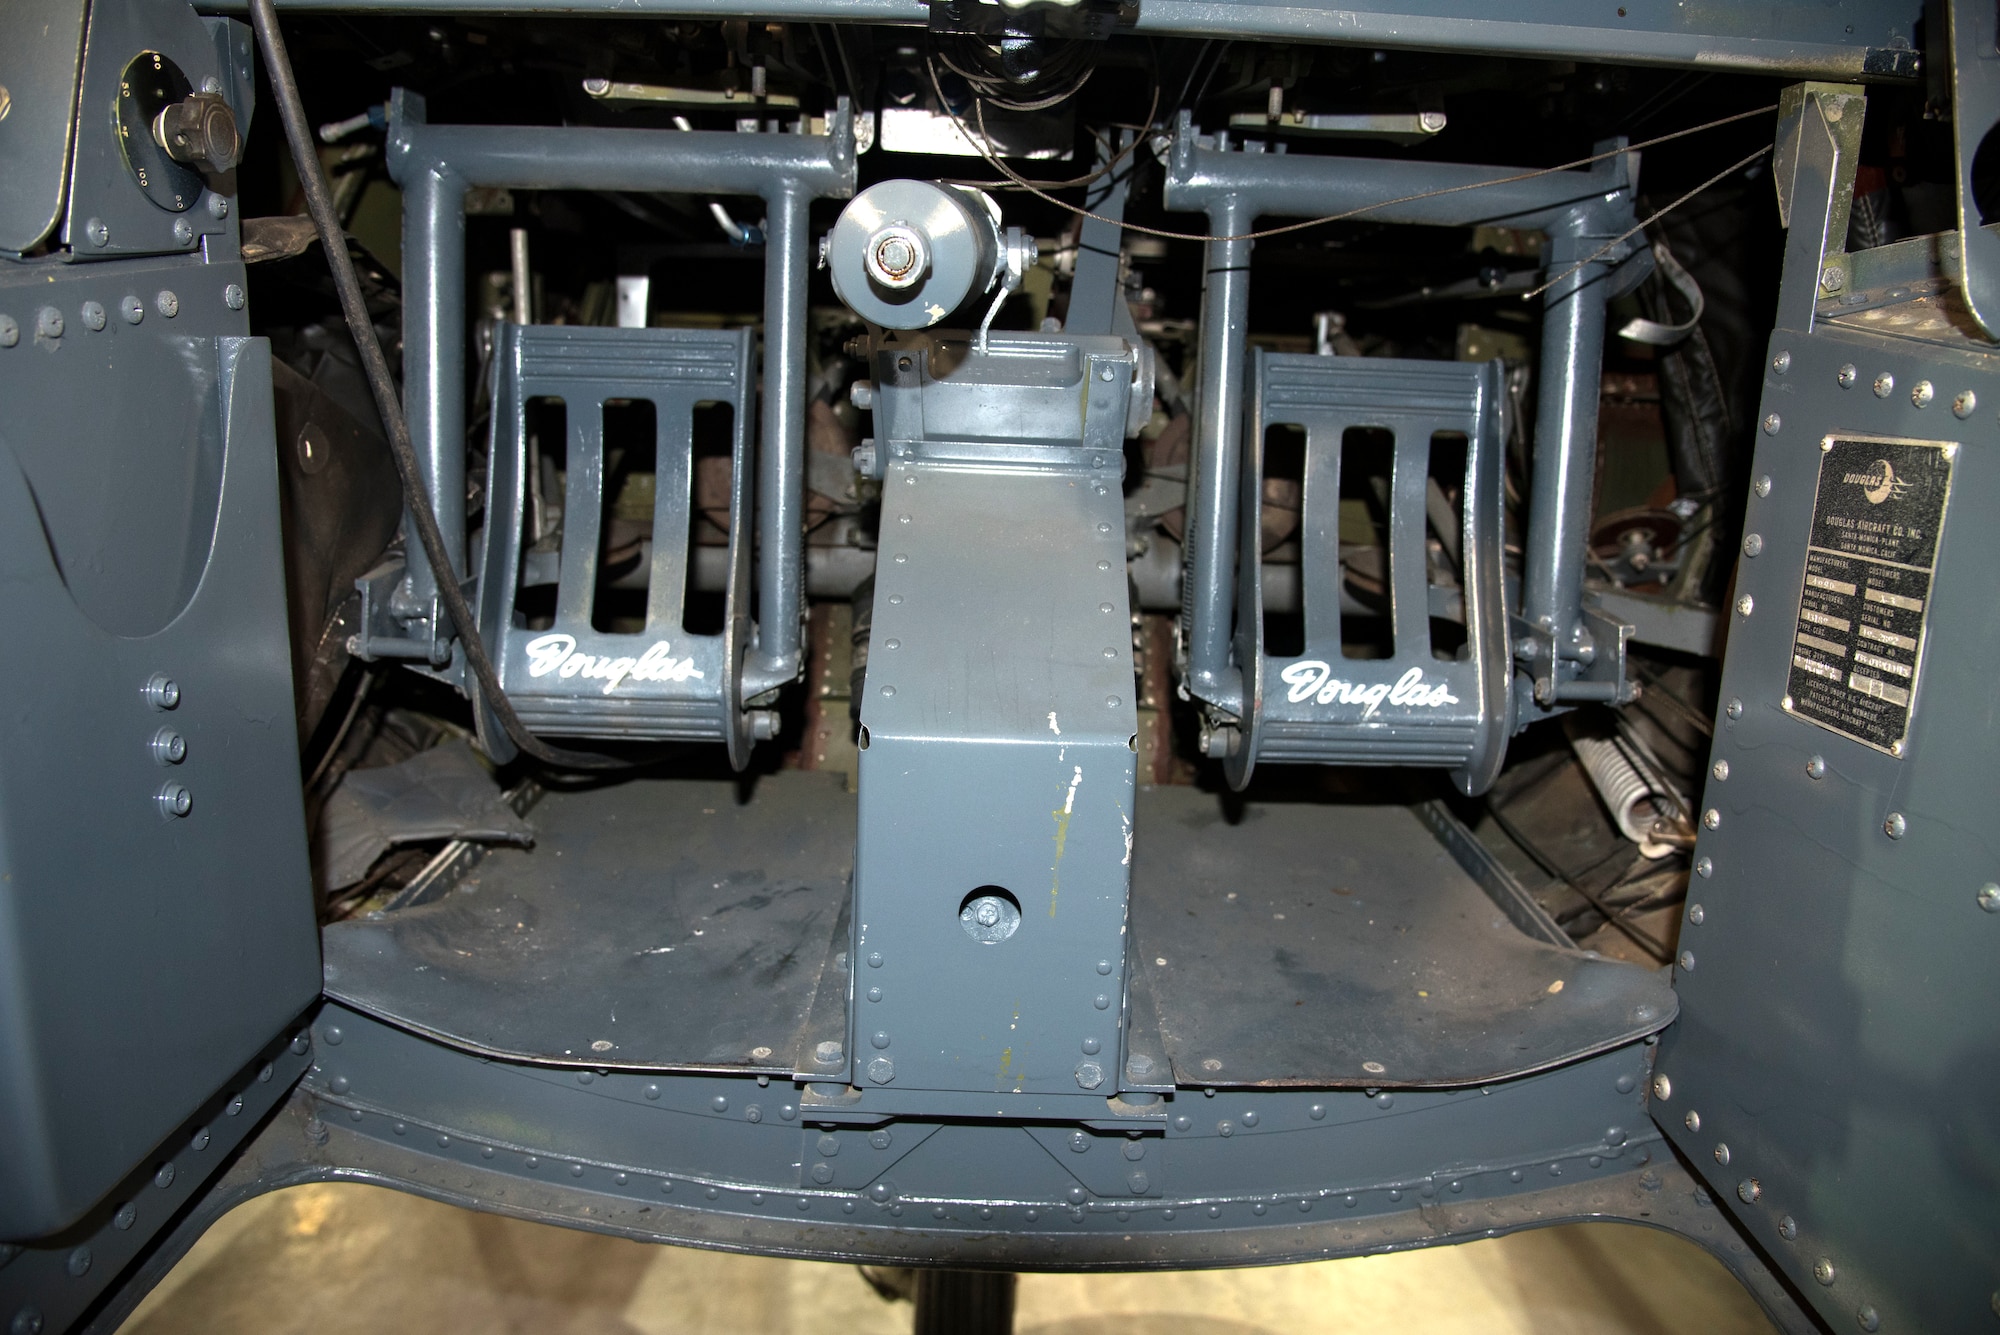 DAYTON, Ohio -- Douglas X-3 Stiletto cockpit(foot pedal controls) at the National Museum of the United States Air Force. This aircraft is on display in the museum's Research & Development Gallery. (U.S. Air Force photo by Ken LaRock)